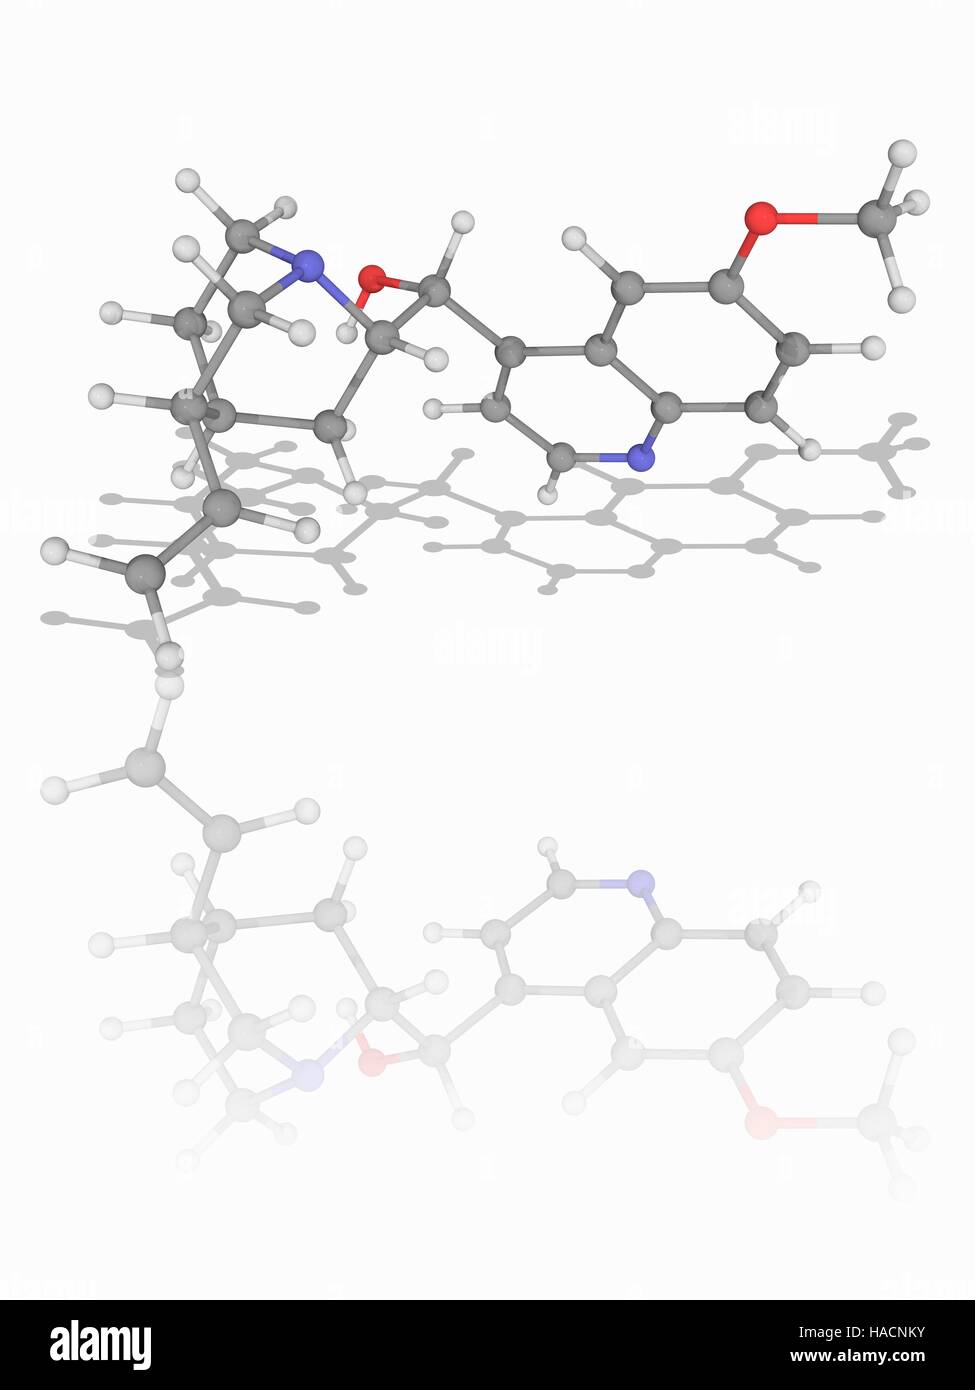 Quinine. Molecular model of the drug quinine (C20.H24.N2.O2), a natural alkaloid with anti-pyretic, anti-malarial, analgesic and anti-inflammatory properties. Atoms are represented as spheres and are colour-coded: carbon (grey), hydrogen (white), nitrogen (blue) and oxygen (red). Illustration. Stock Photo